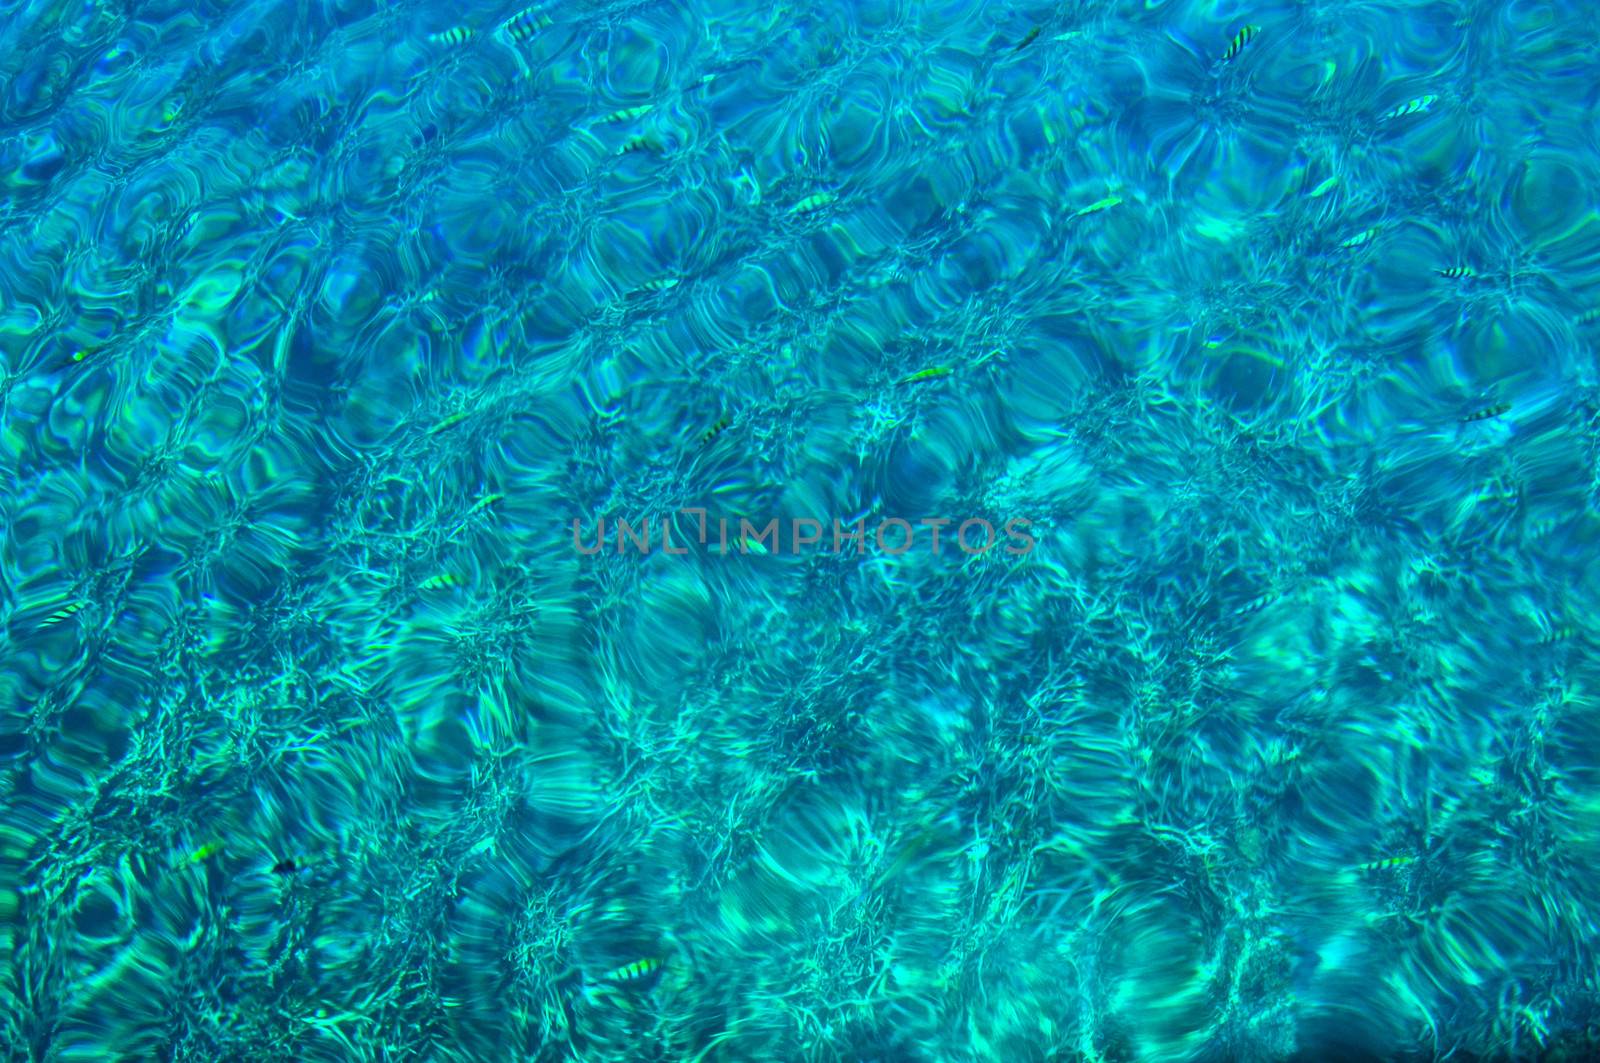 Fish in water in Koh Tao, Thailand, Asia.